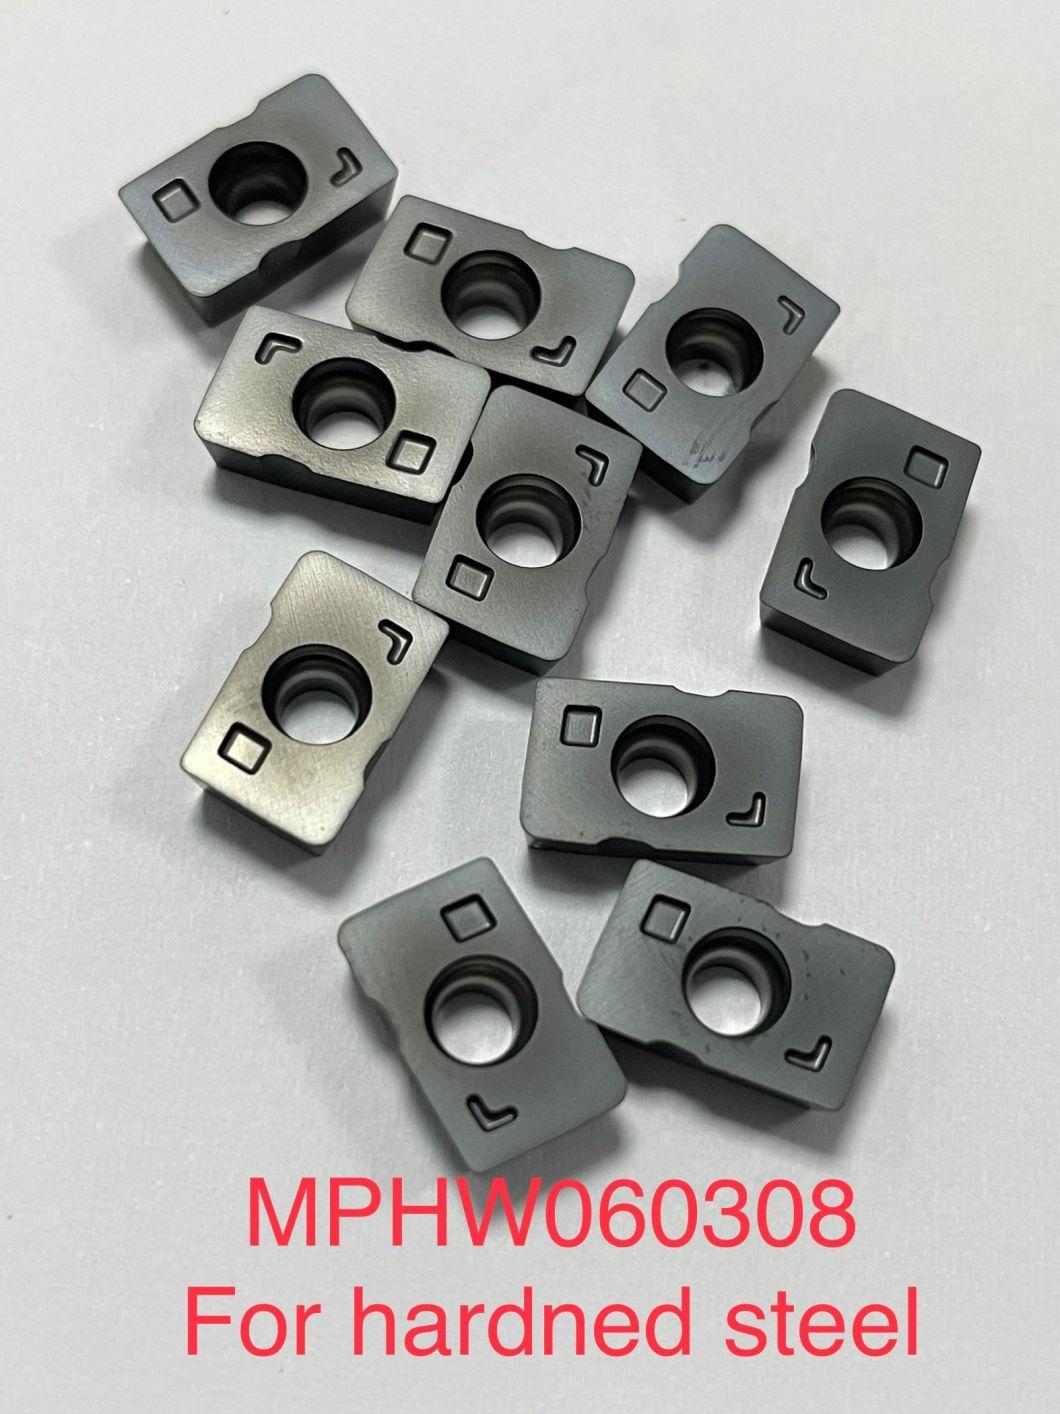 Tungsten Carbide CNC High Feed Turning Thread Milling Inserts Apmt1604pder-H2